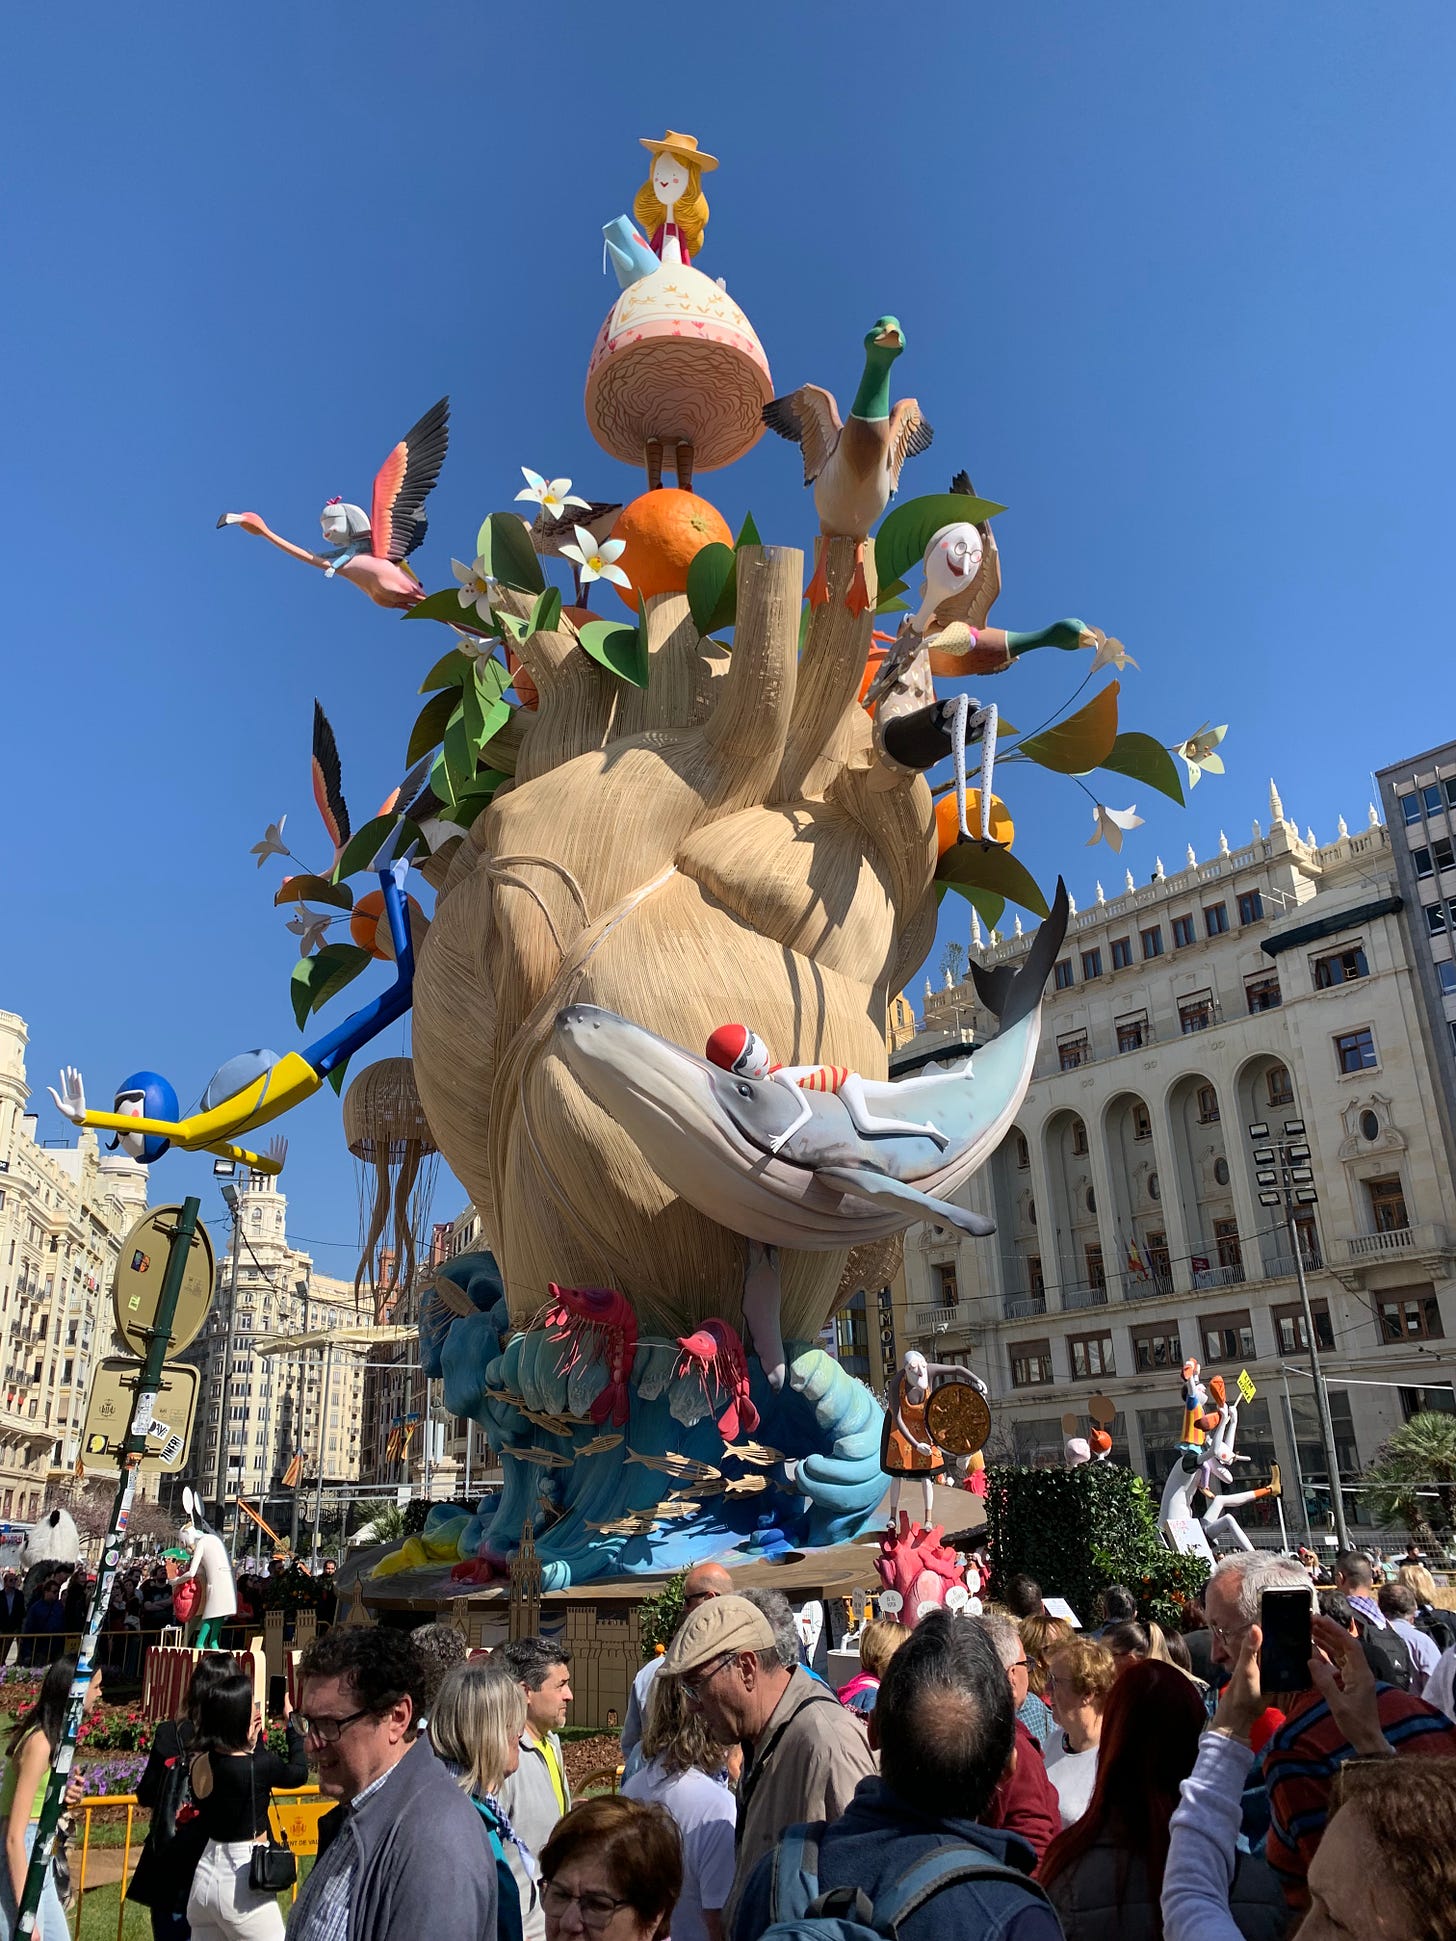 The completed Falla